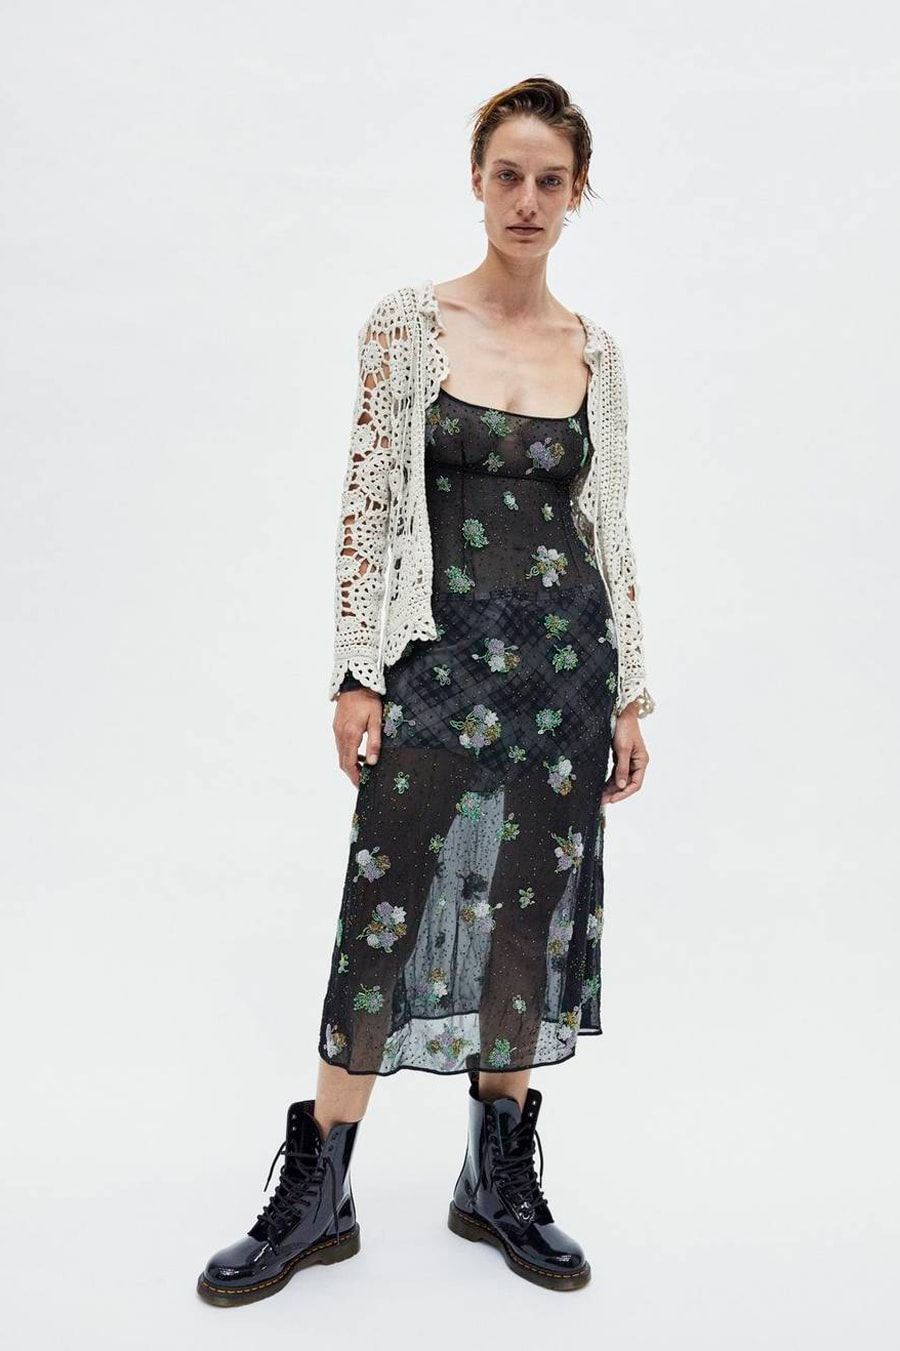 Marc Jacobs Resort 2019 Redux Collection Floral Embroidered Chiffon Dress Black Crochet Open Cardigan Tan